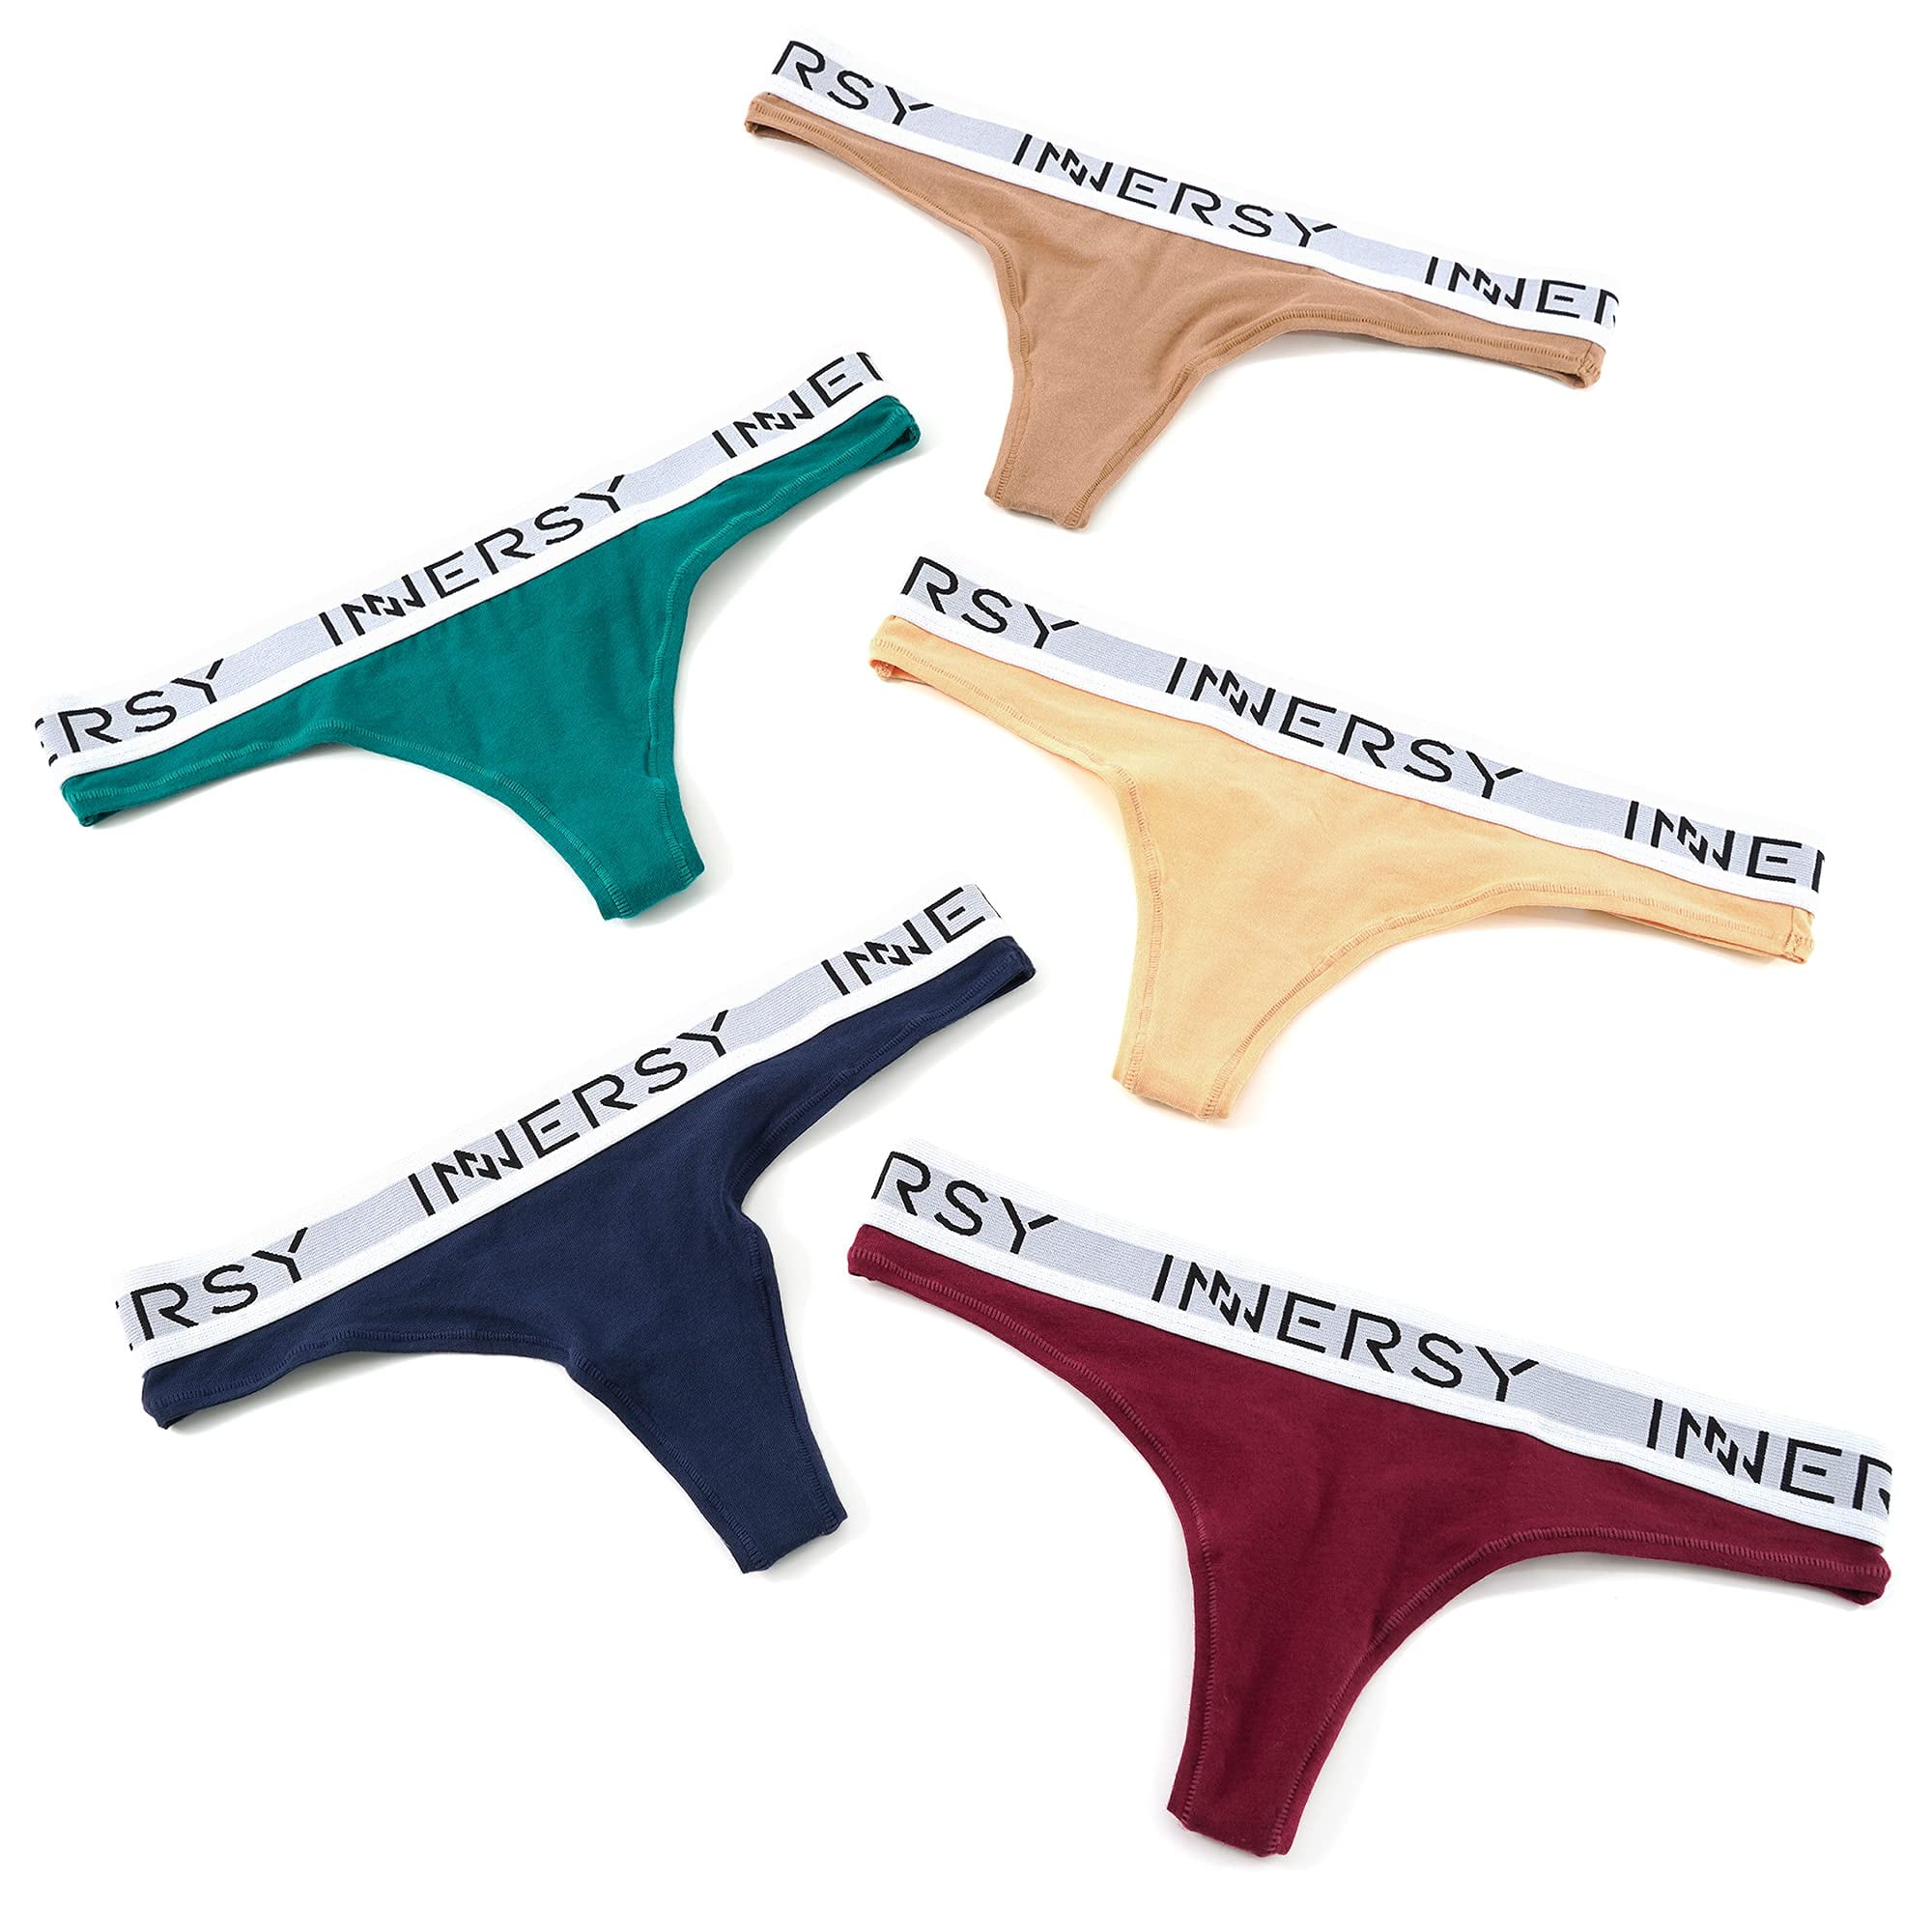 INNERSY Women's Thong Panty Cotton Sporty Thong Underwear 5-Pack (XL,  Vibrant)